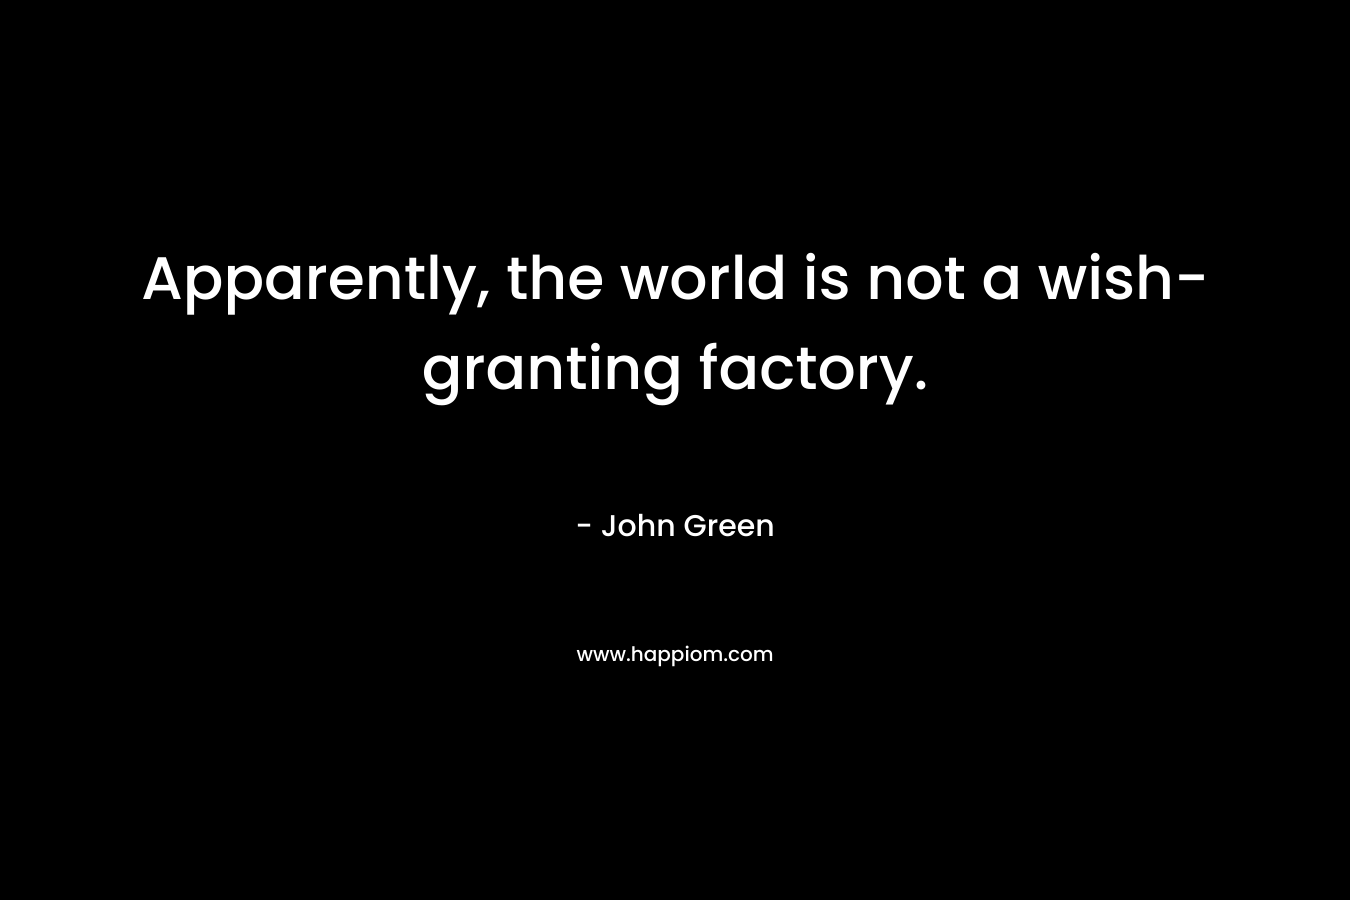 Apparently, the world is not a wish-granting factory. – John Green